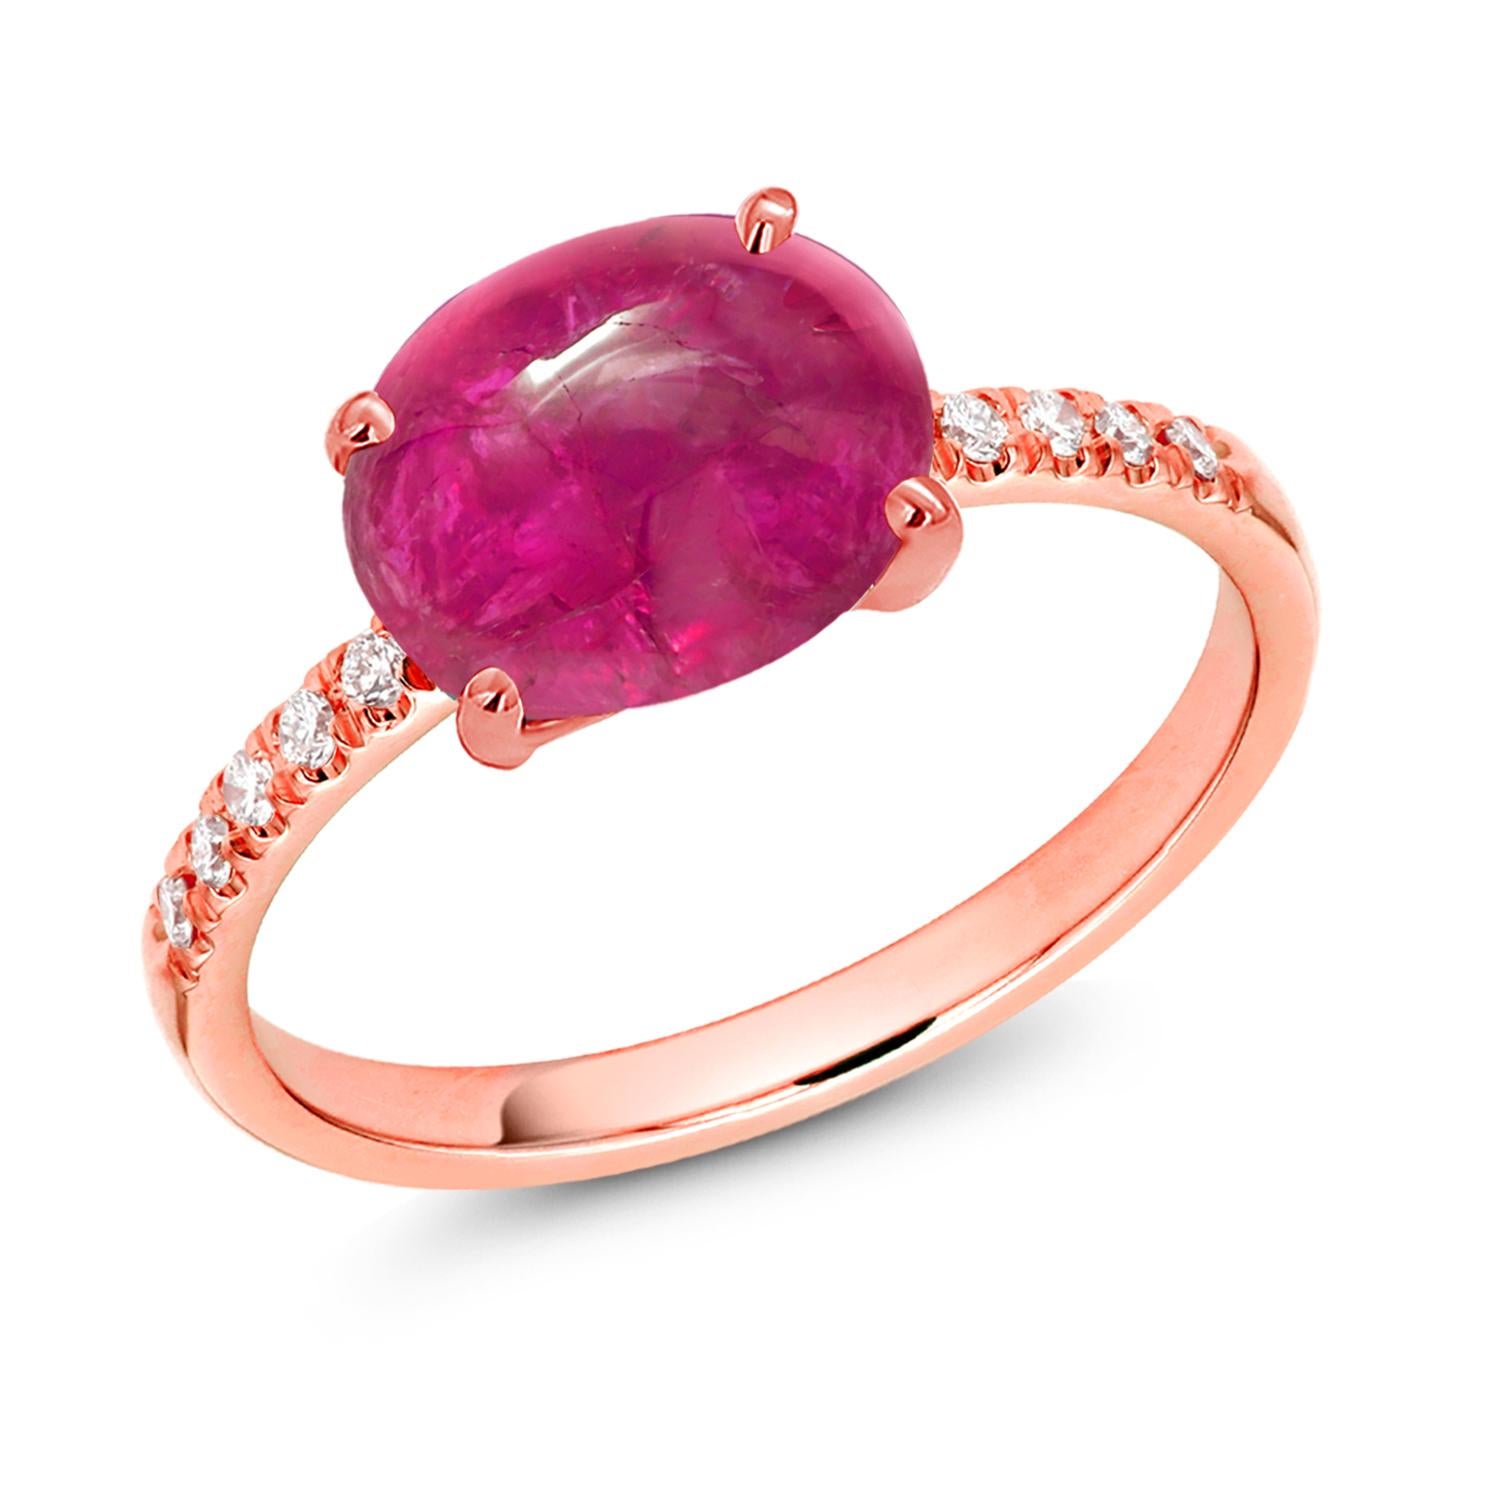 Cabochon Burma Ruby 2.80 Carat Diamond 0.25 Carat Rose Gold Cocktail Ring For Sale 2